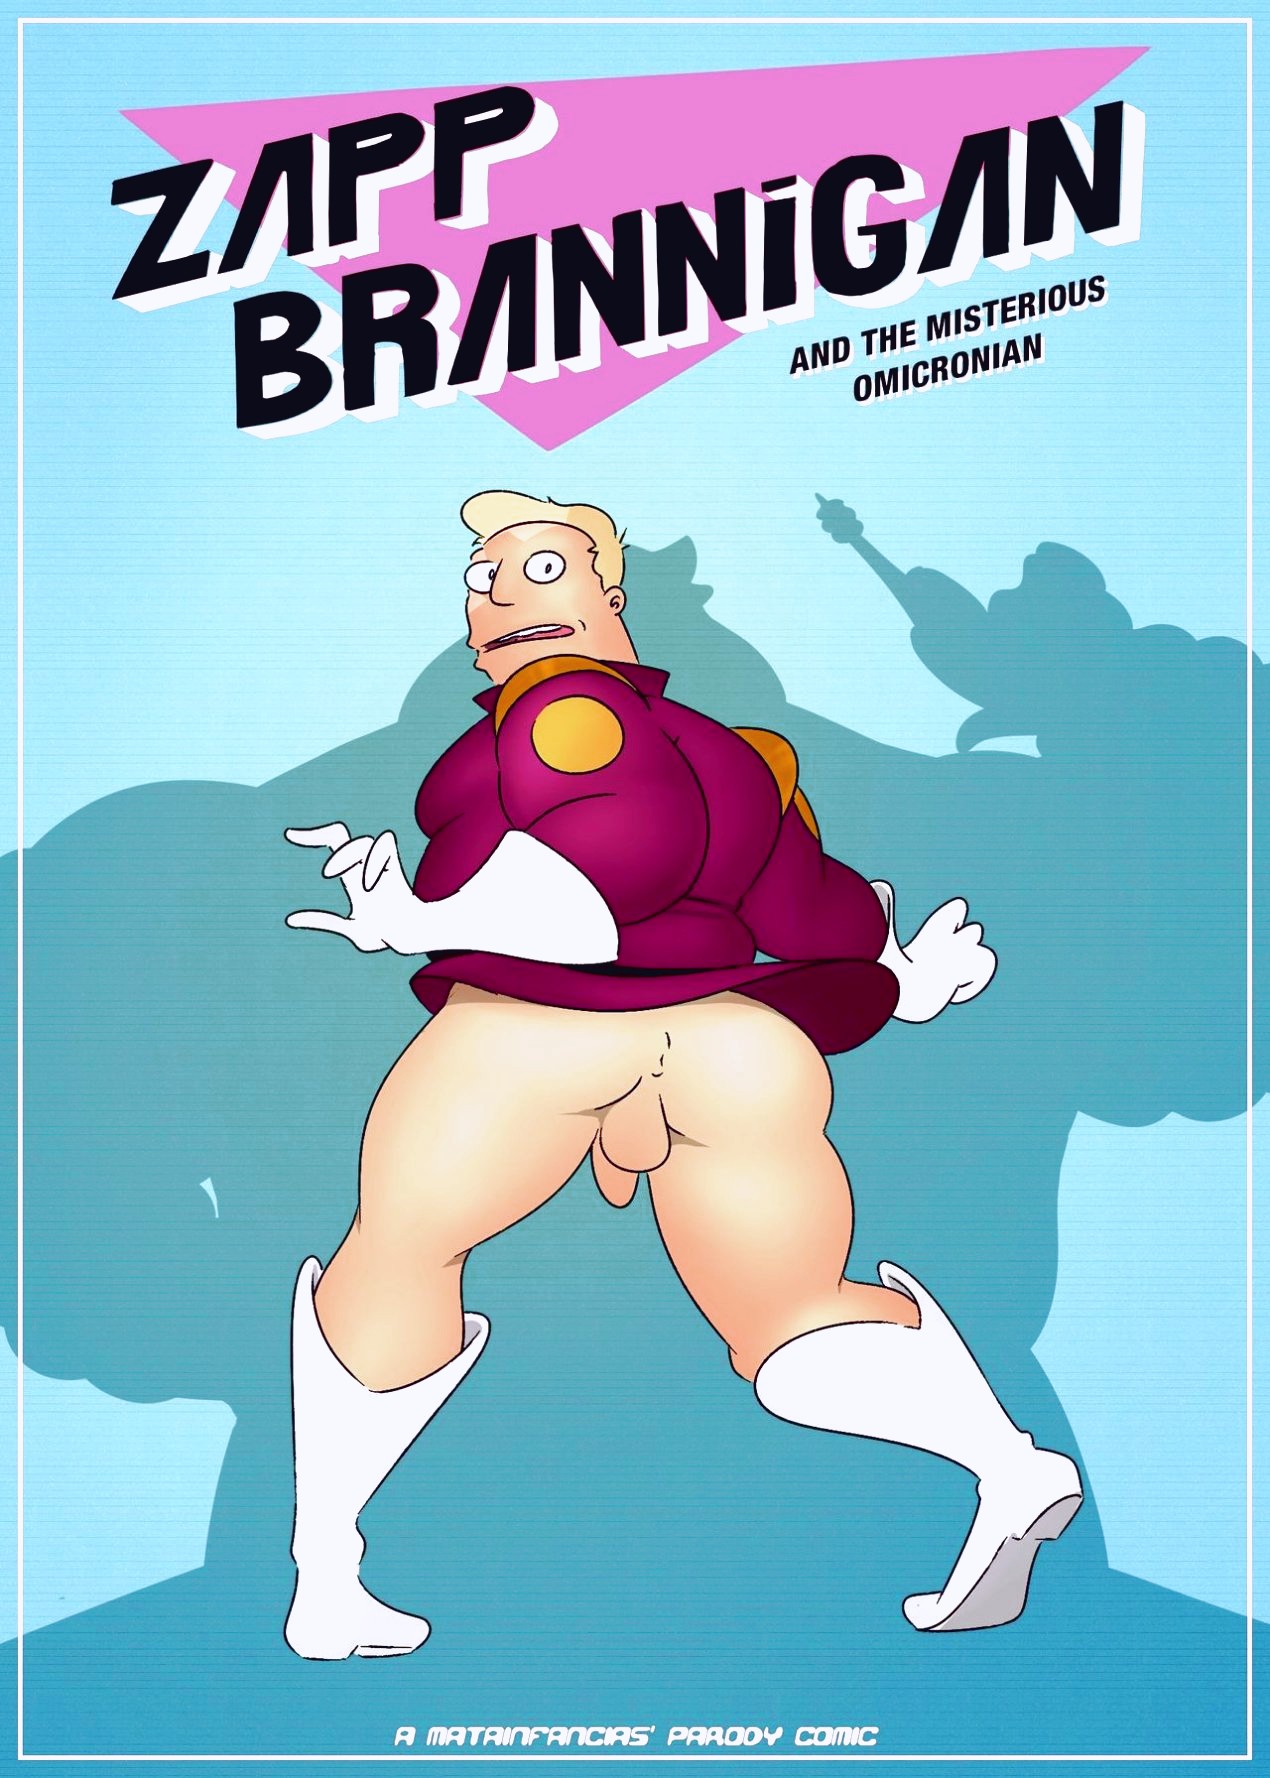 Zapp Brannigan & The Misterious Omicronian porn comic page 01 on category Futurama